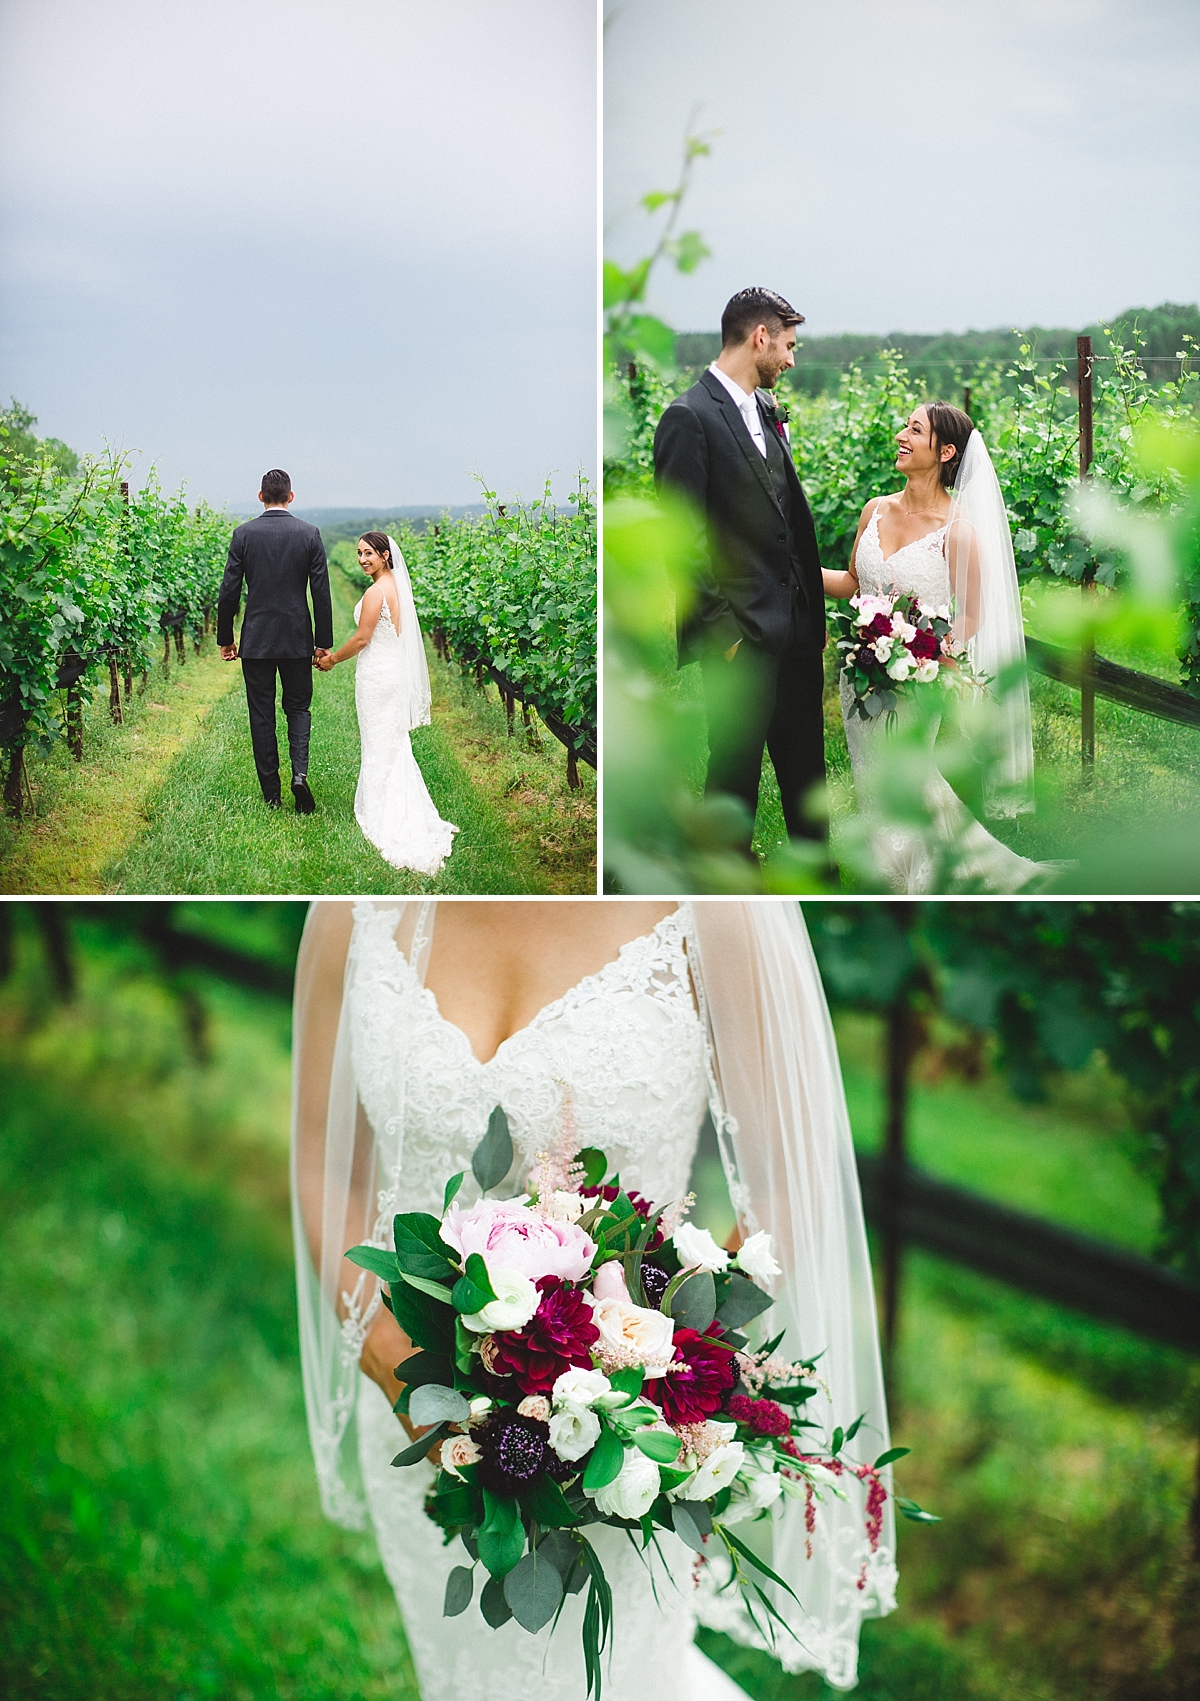 Stone Towner Winery Wedding – First look | Izzy Hudgins Photography